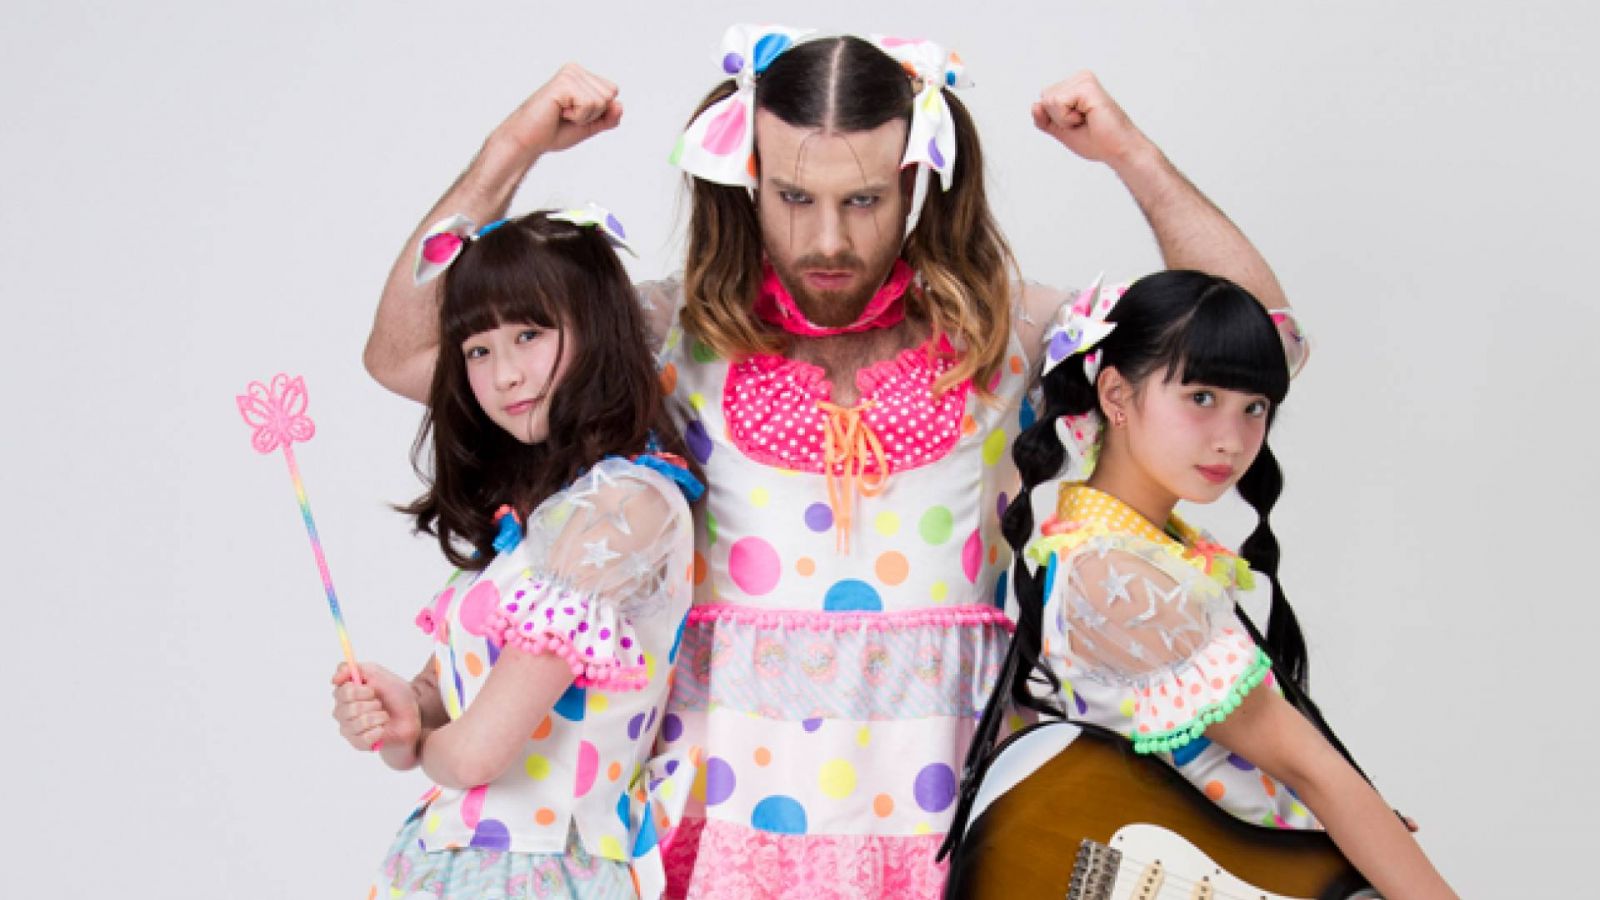 LADYBABY - Nippon Manju © 2015 clearstone Co., Ltd. All rights reserved.